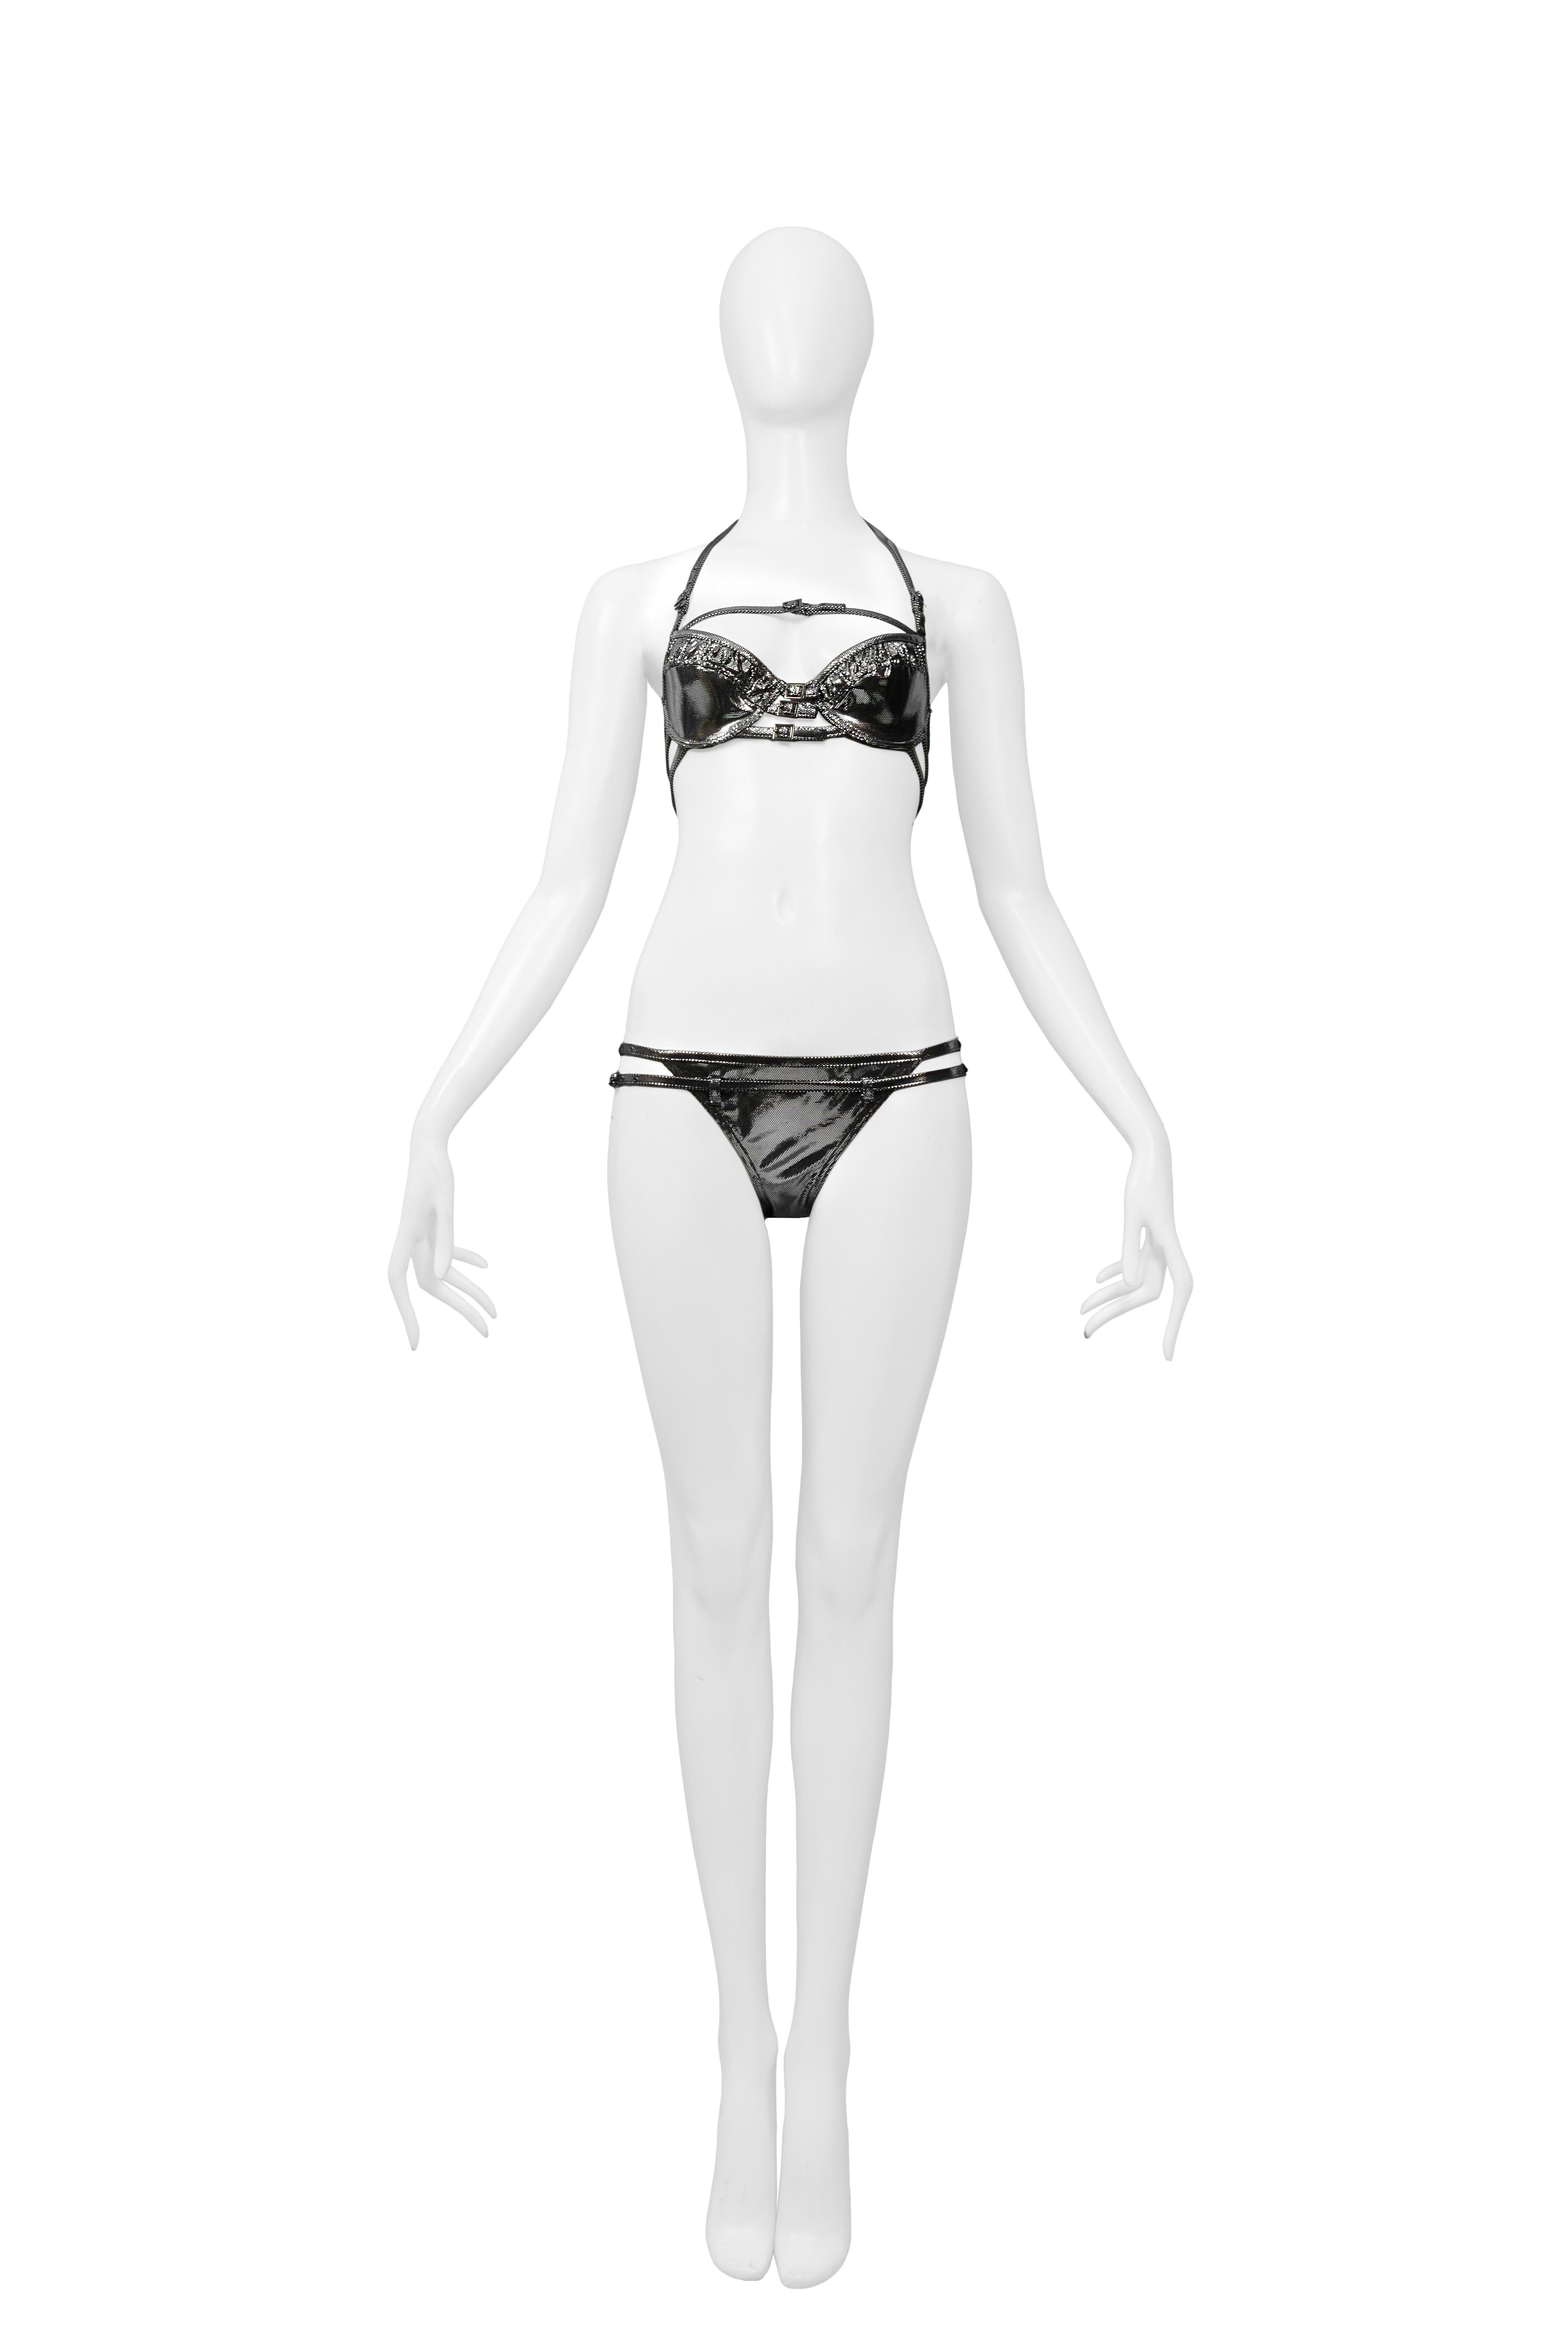 Resurrection is excited to offer this vintage Christian Dior silver metallic wet look bikini featuring bondage straps with silver grommets and buckles, hipster bikini bottoms, and black lining. This suit appears unworn. 

Christian Dior